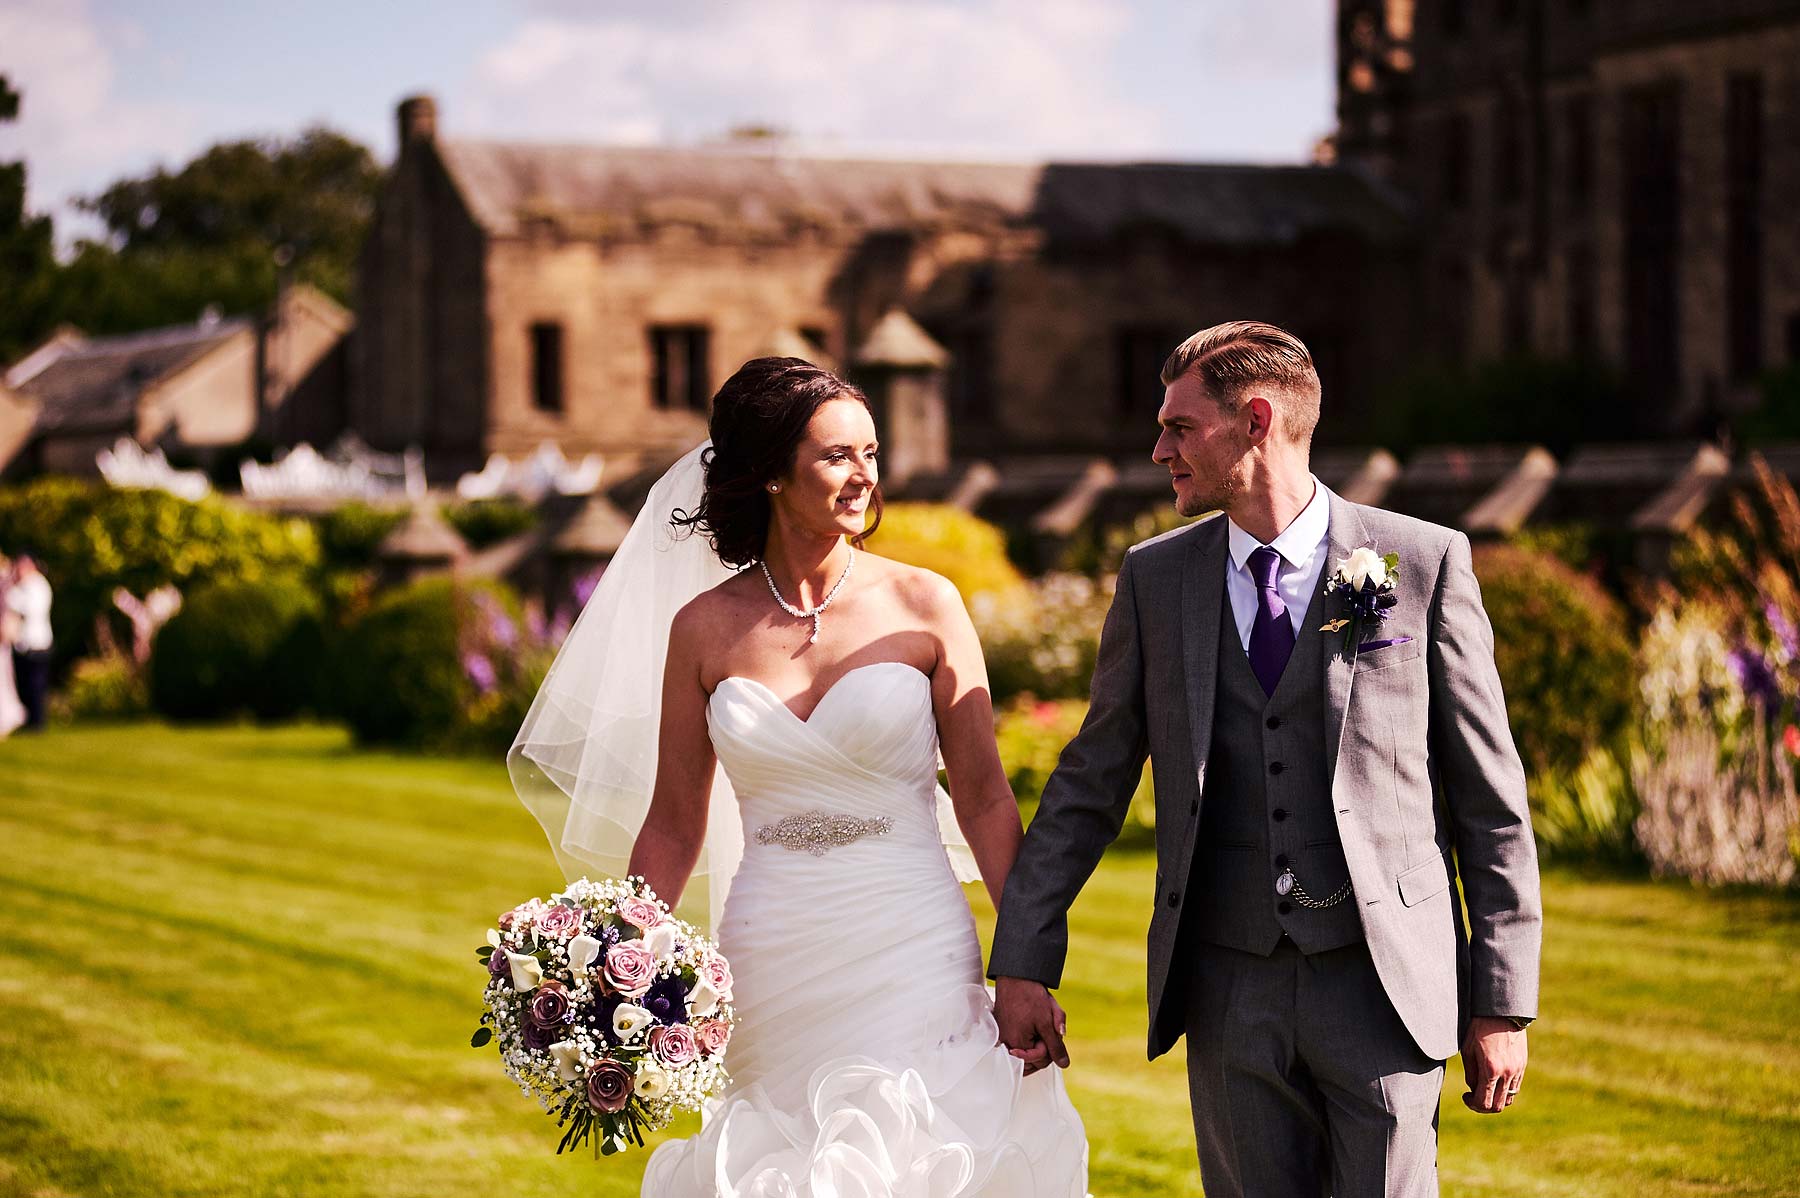 Natural portraits of the beautiful bride and groom around the grounds of Allerton Castle in Yorkshire by Documentary Wedding Photographer Stuart James